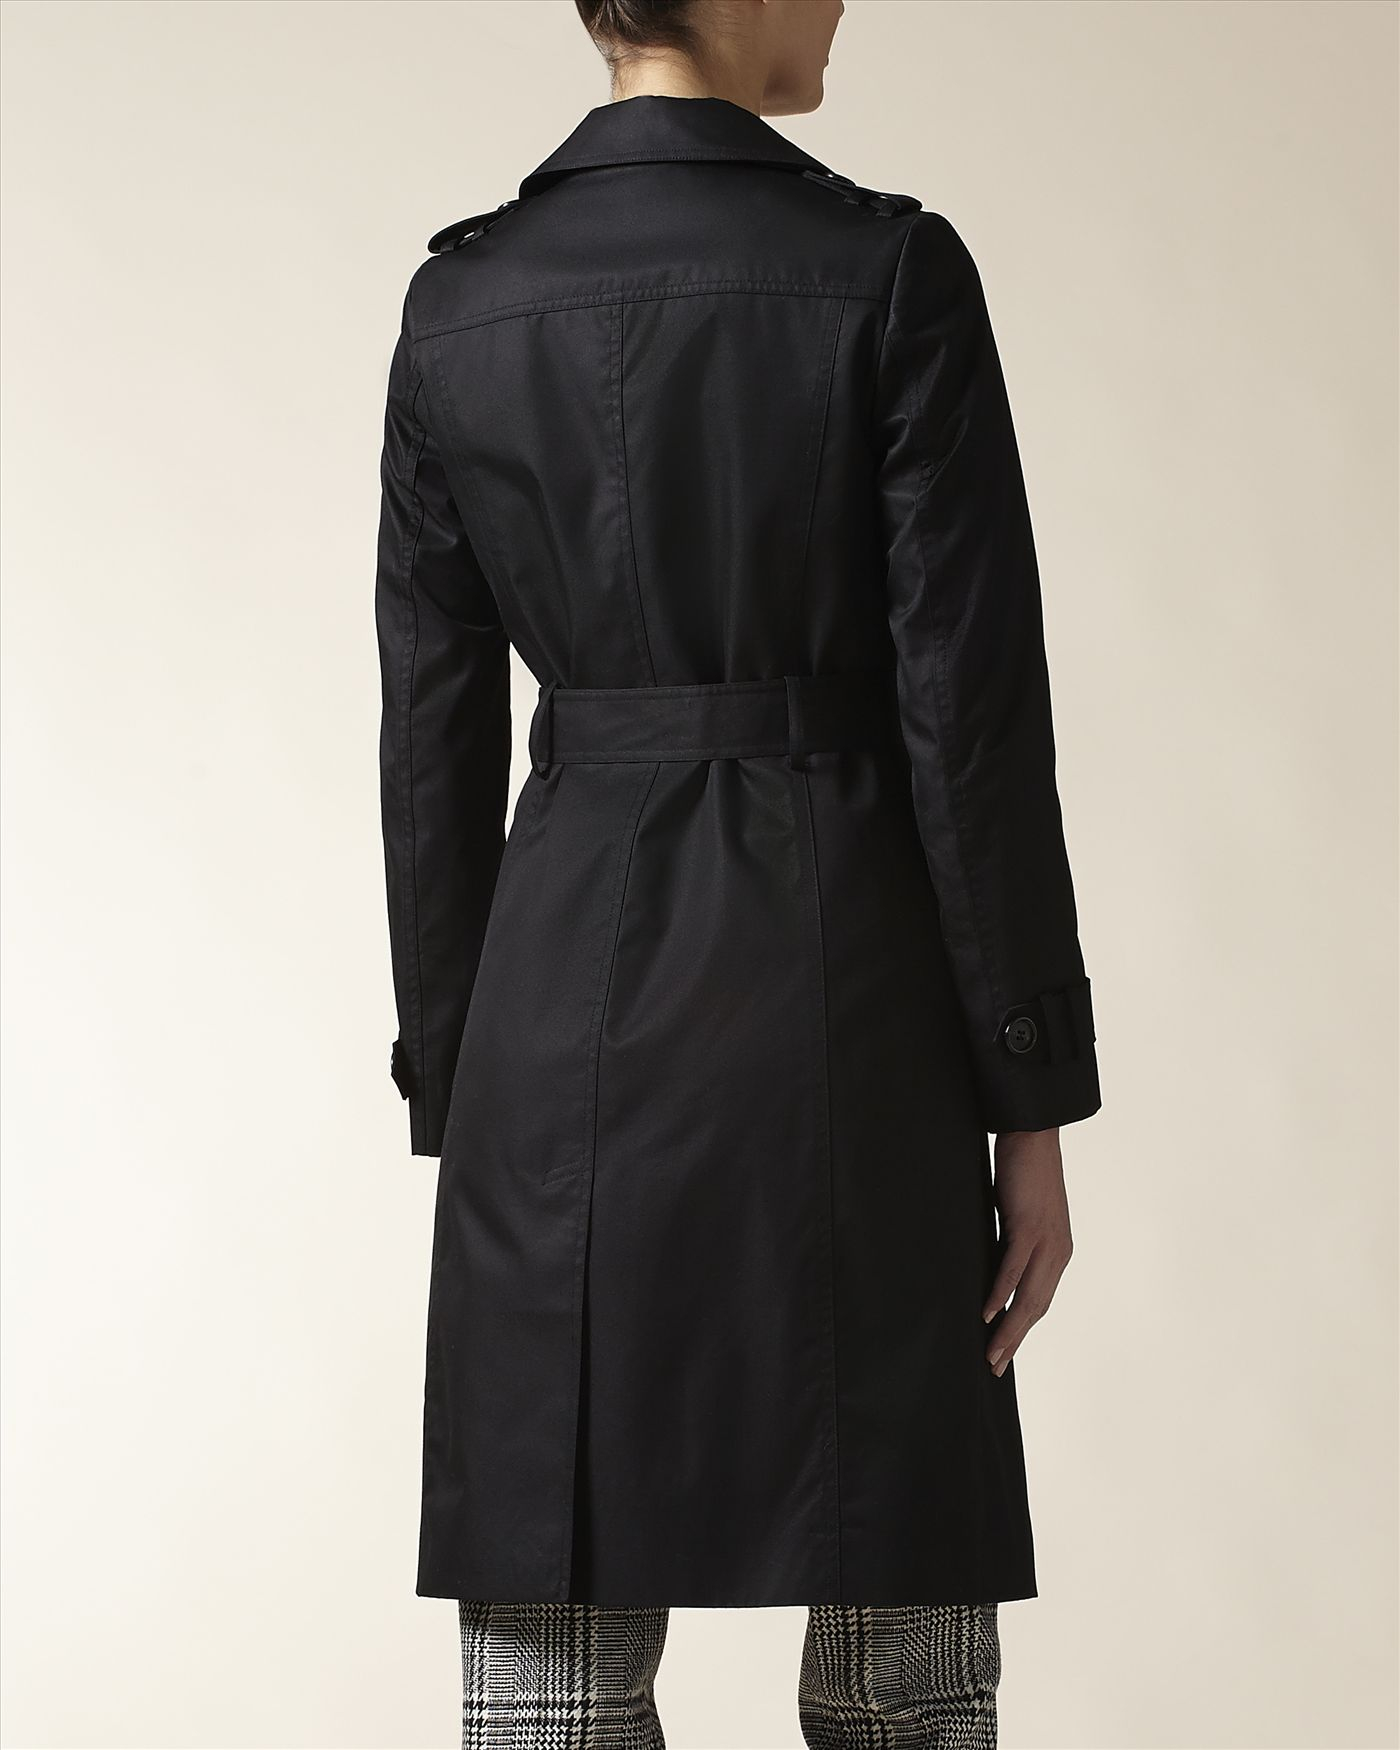 Jaeger Cotton Classic Trench Coat in Black | Lyst